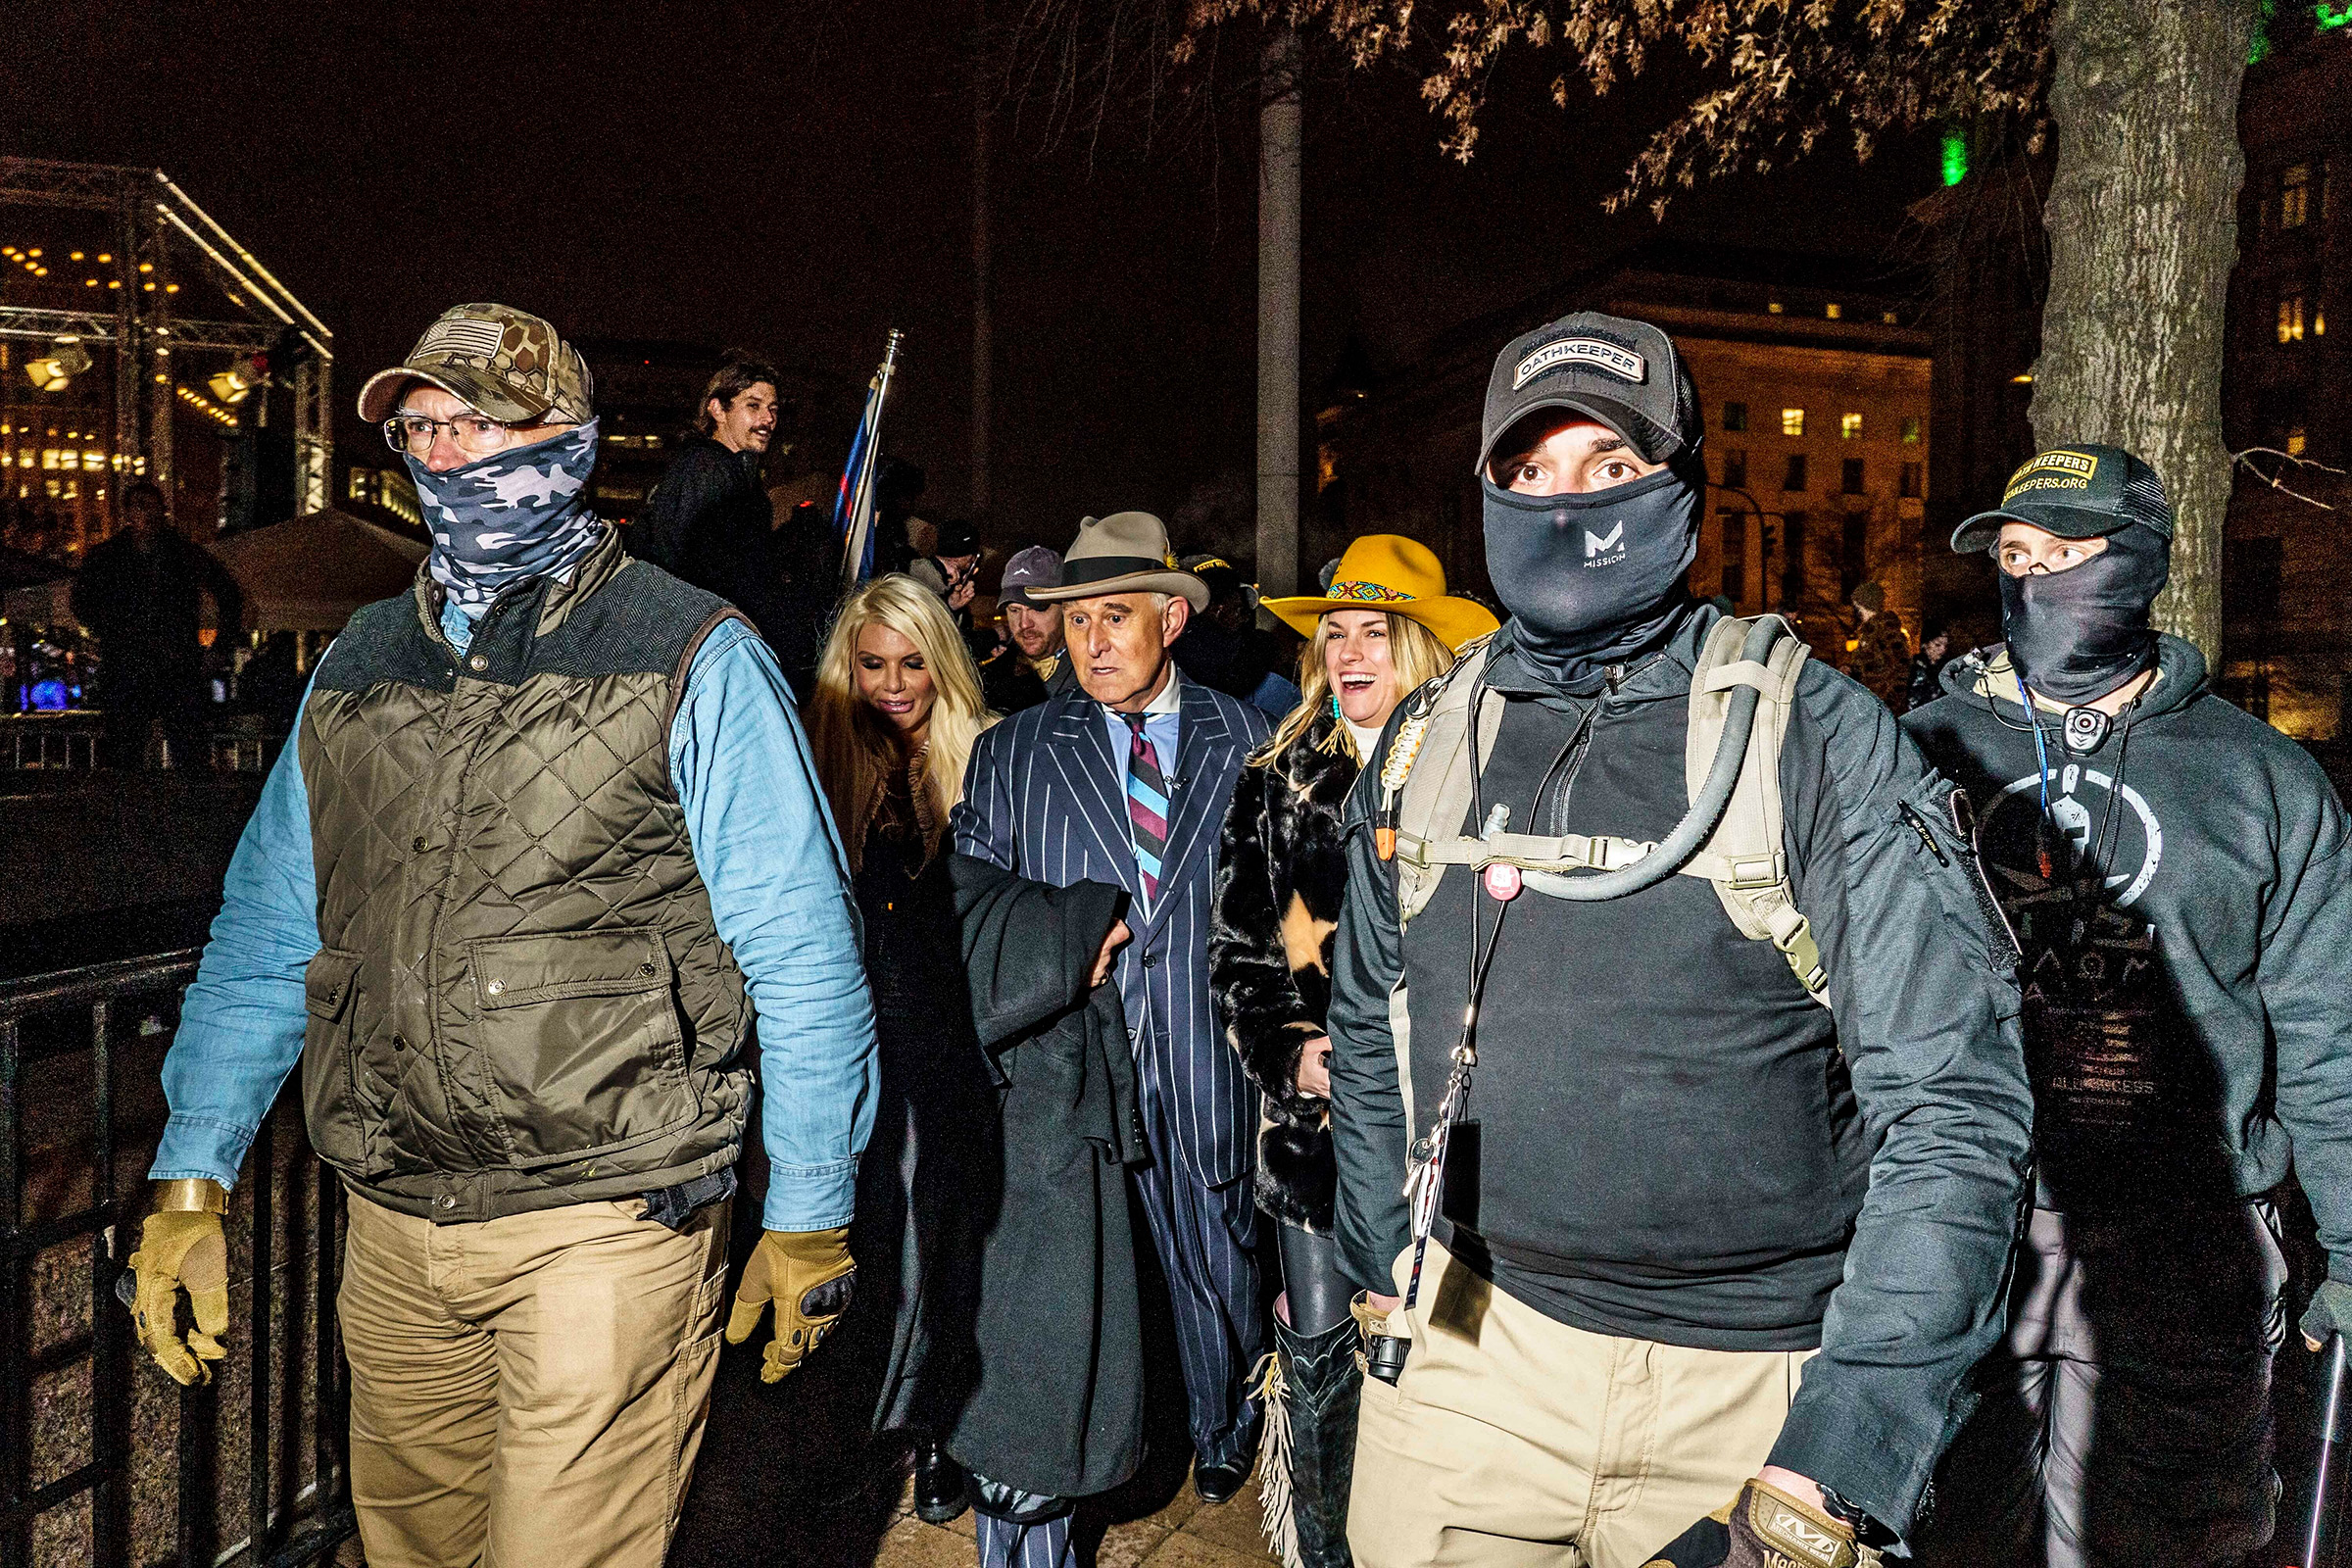 James, front right, and fellow Oath Keepers escort former Trump adviser Roger Stone to a rally in Washington the night before the insurrection